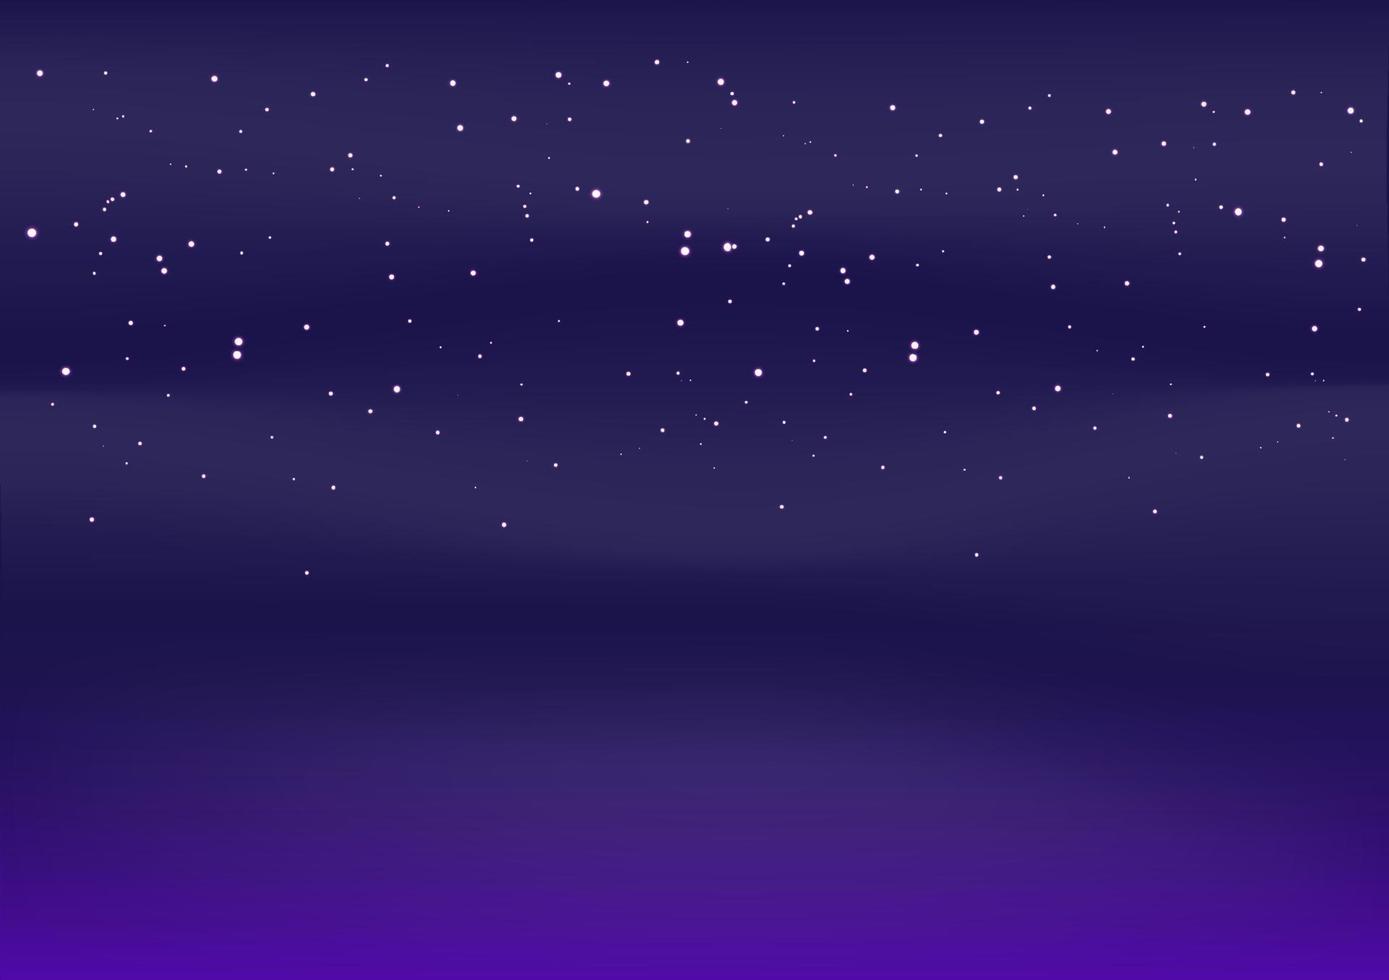 The starry sky at night, Vector